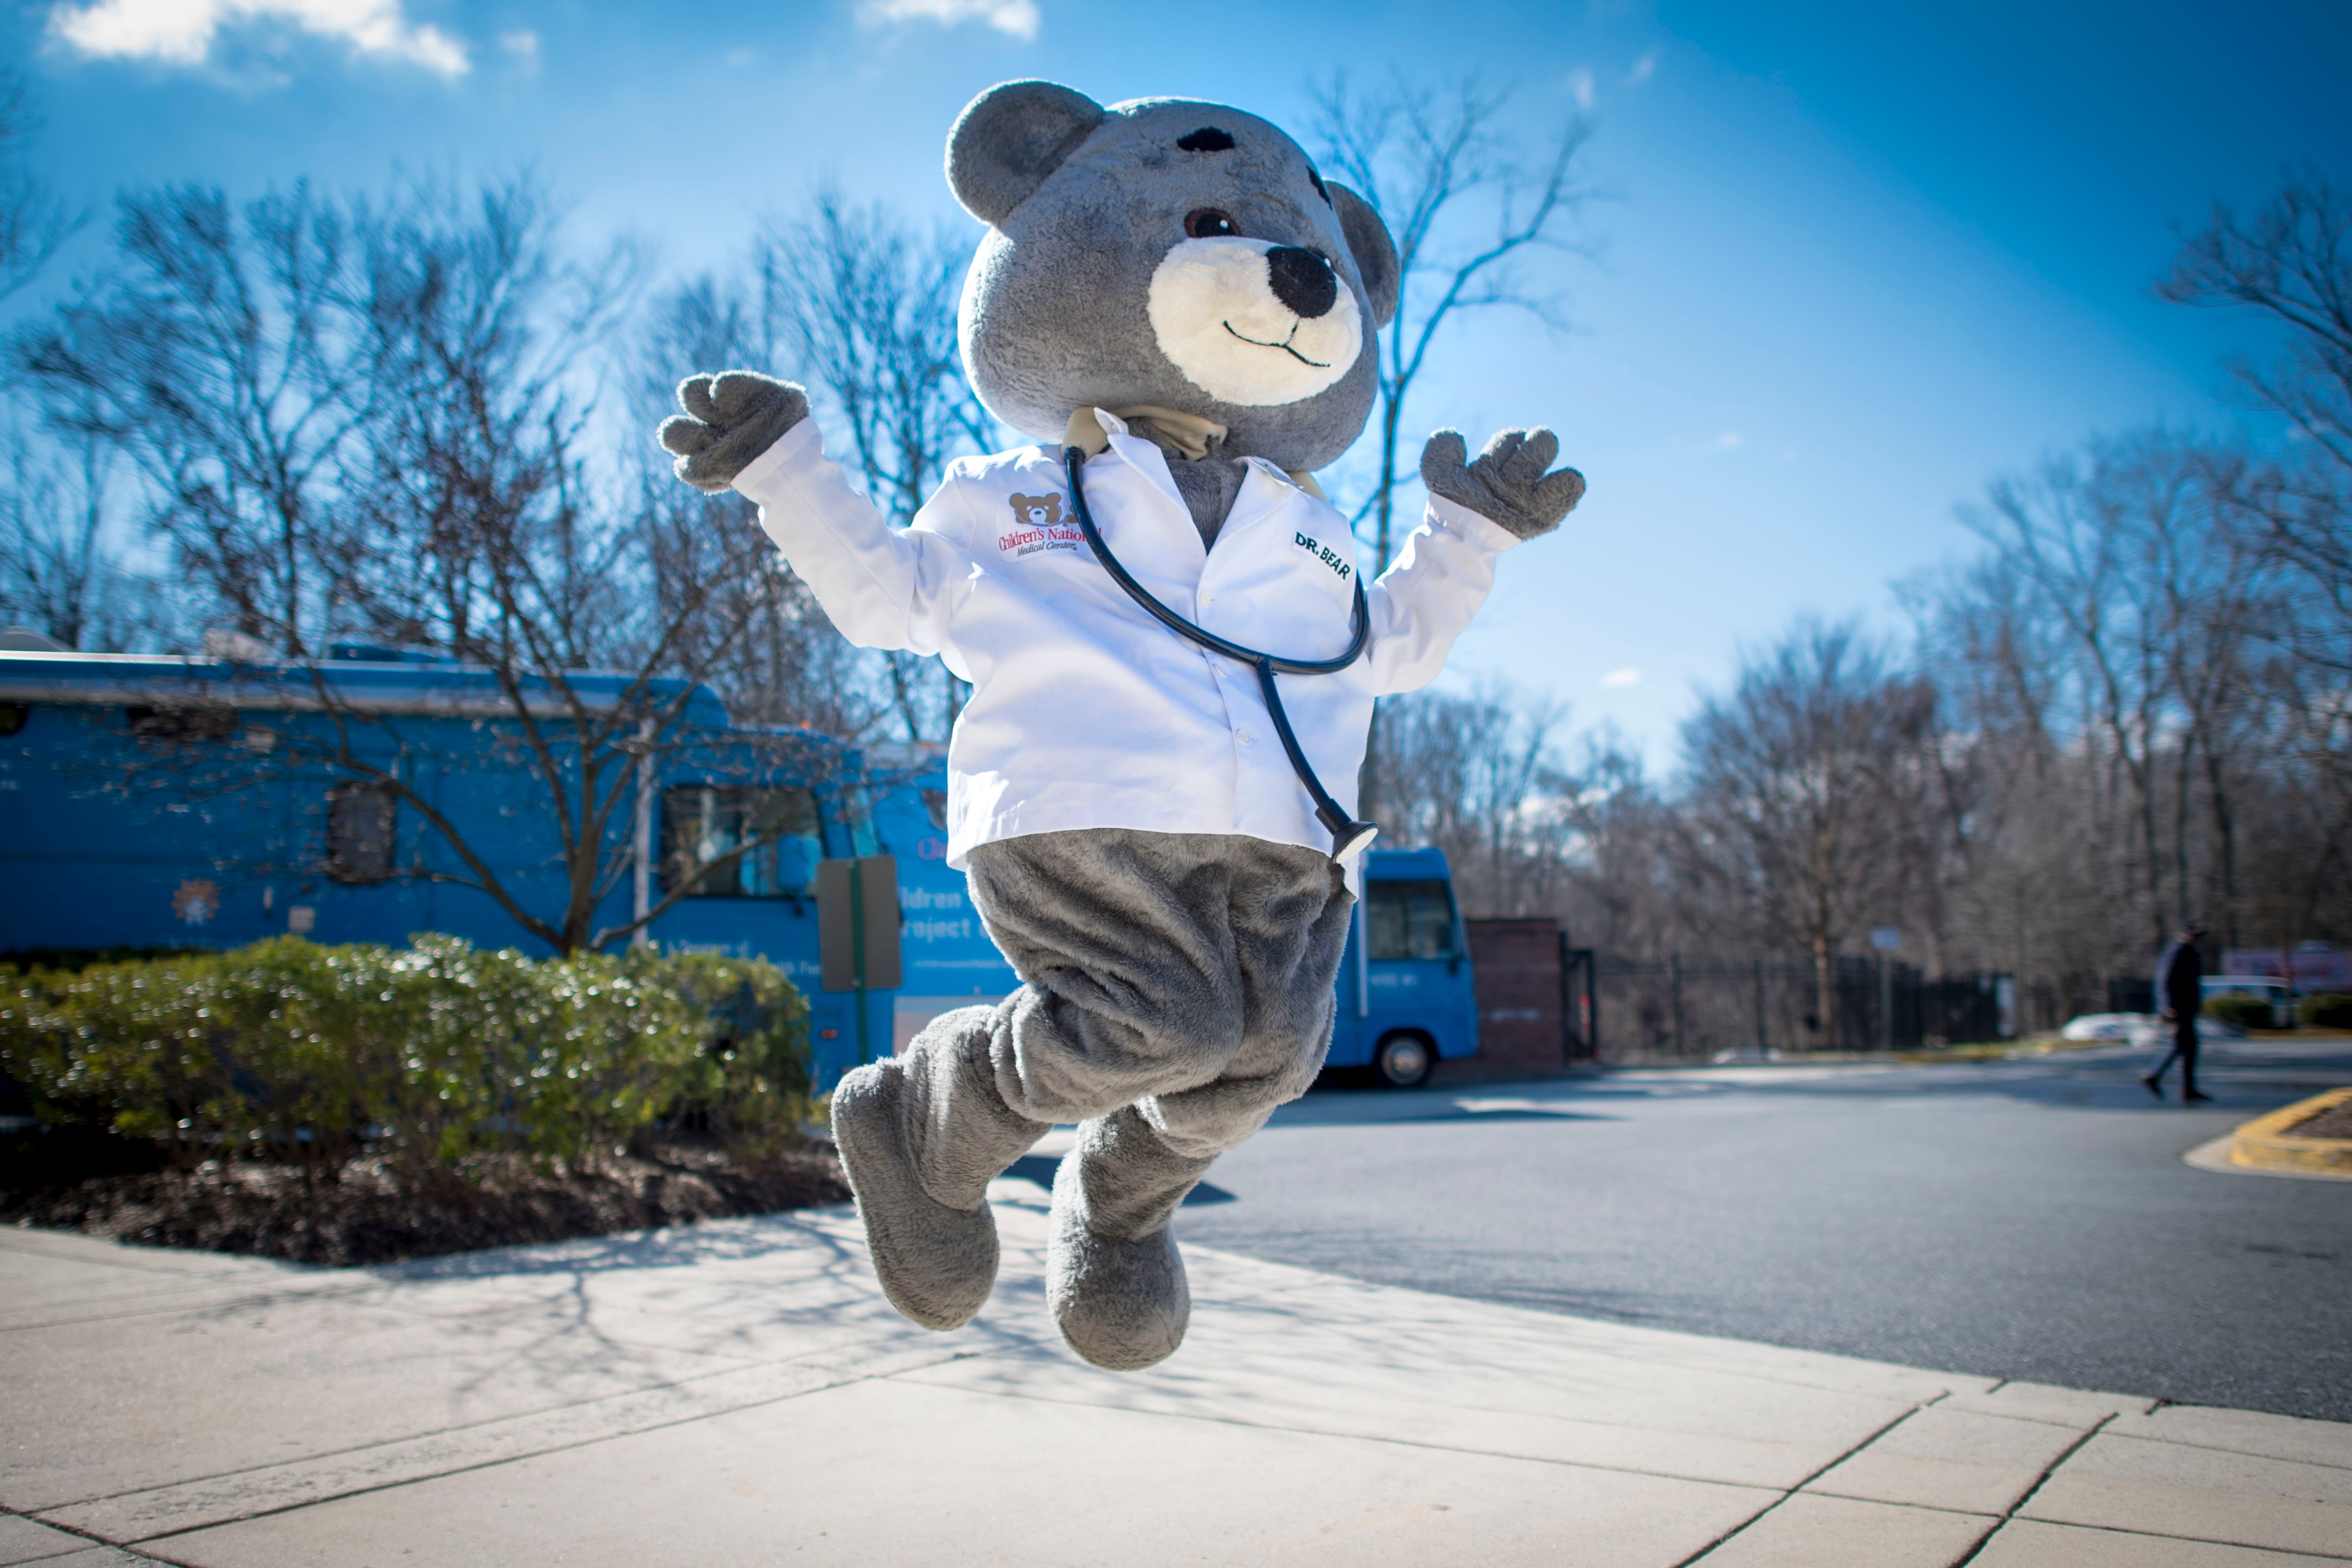 Dr. Bear in a jumping pose